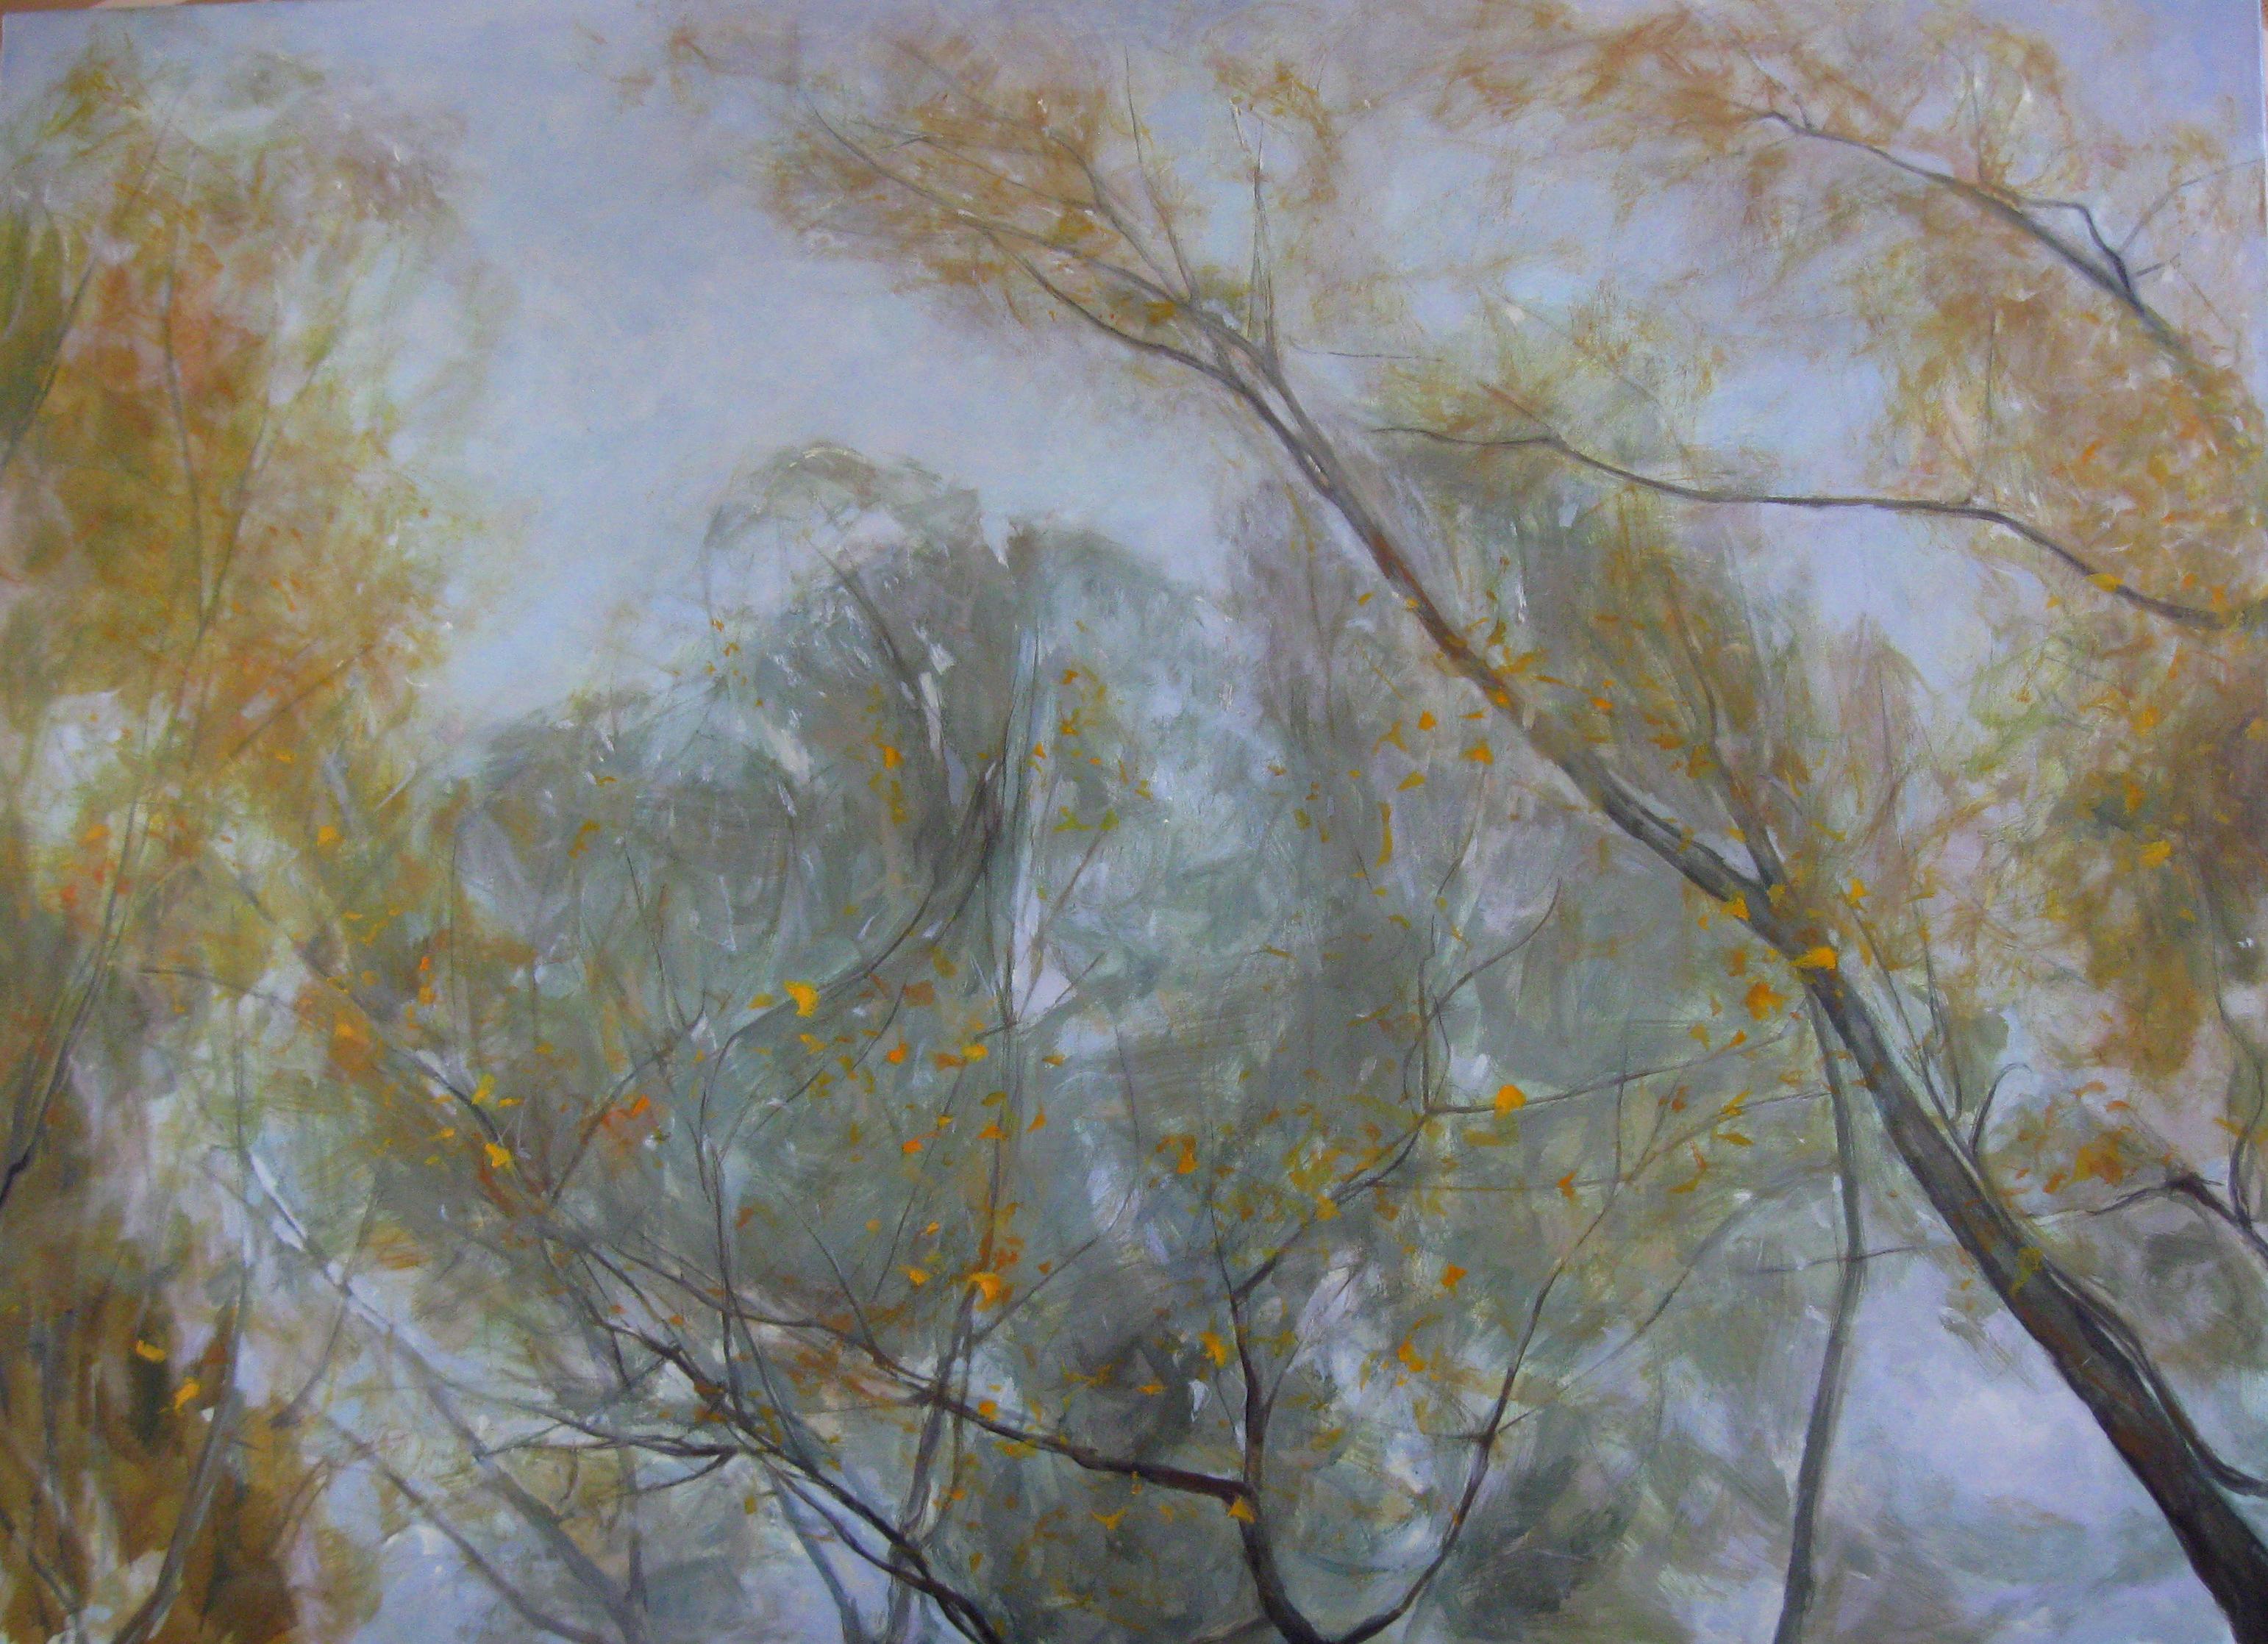 Aspens’ and Willows’ Branches in Autumn, contemporary landscape painting